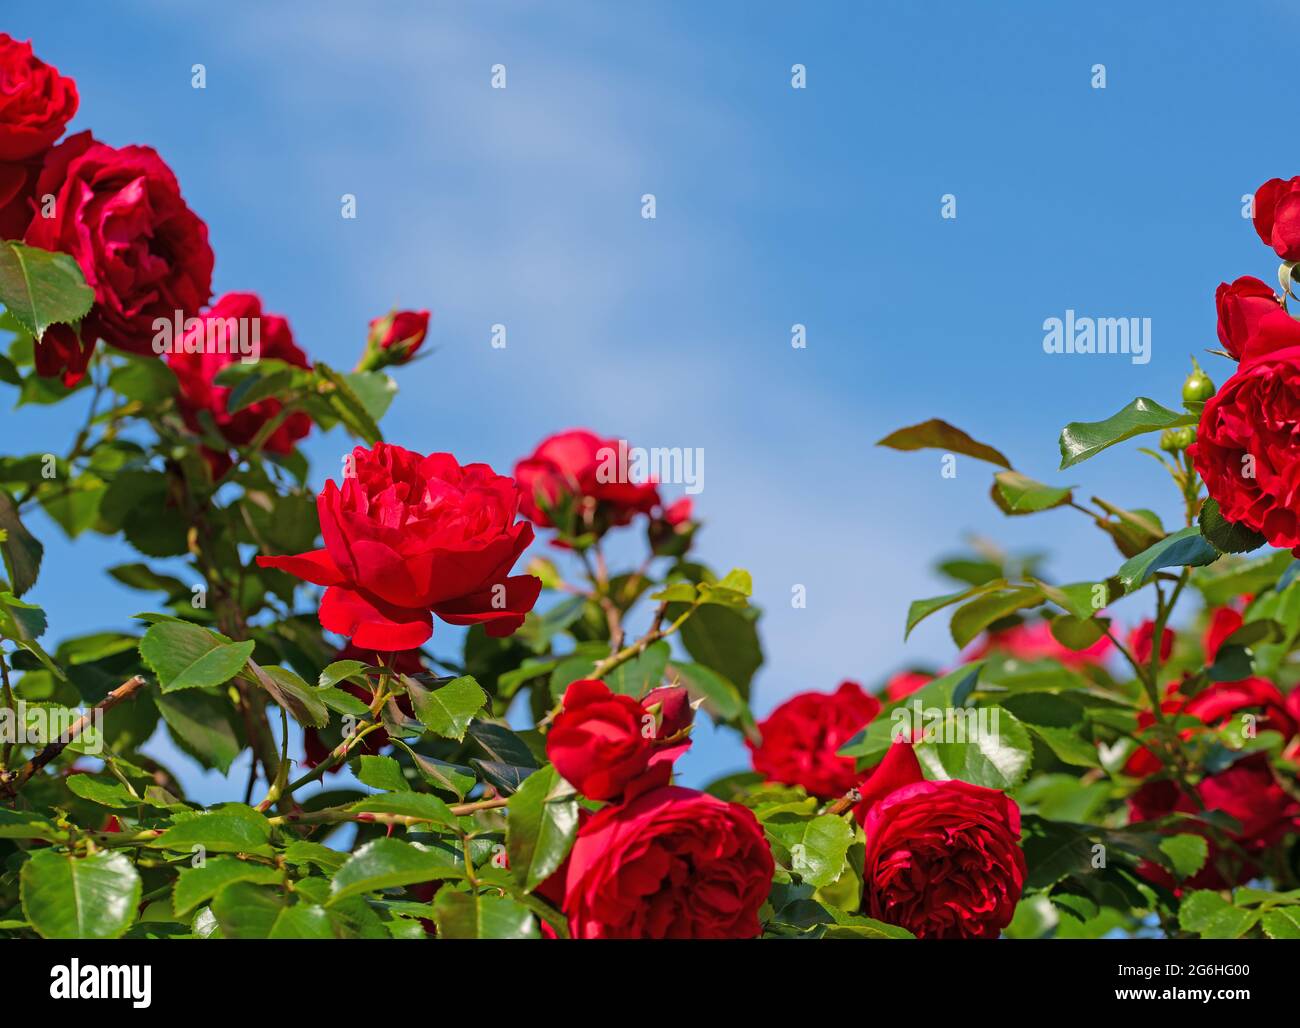 Blooming red hybrid tea roses against a blue sky Stock Photo